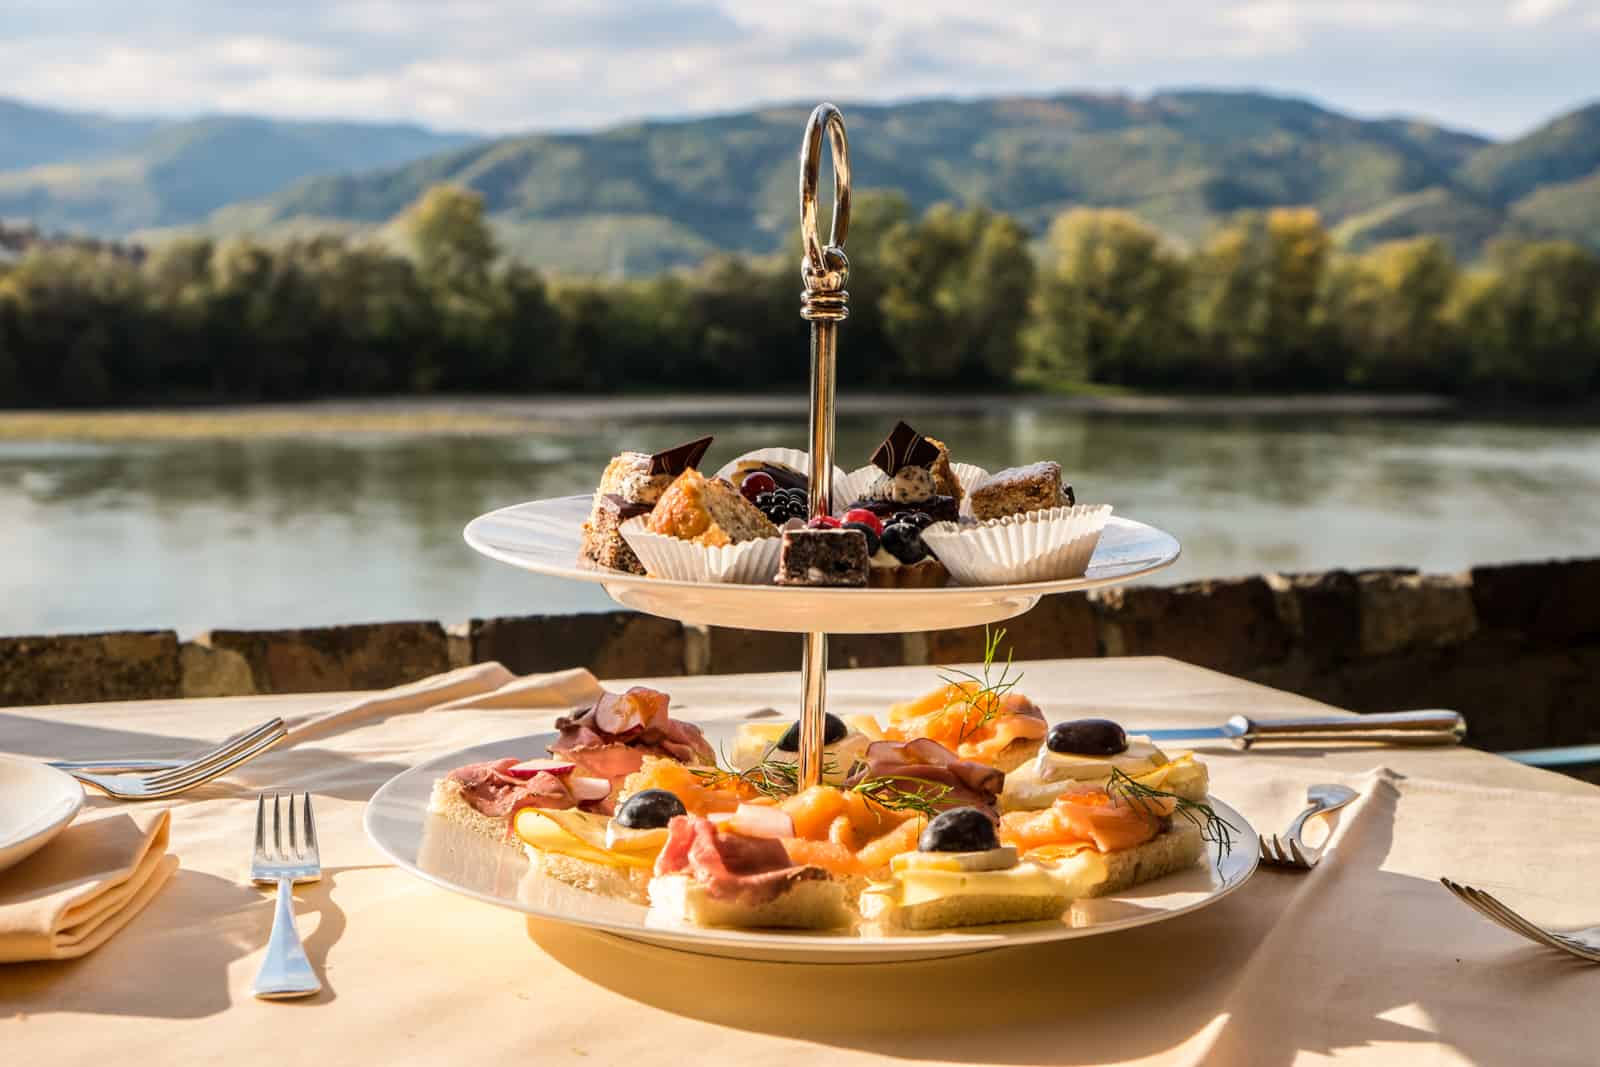 A two-tiered cake tray of afternoon tea at the Schlossberg Hotel in Durnstein overlooking the Danube River